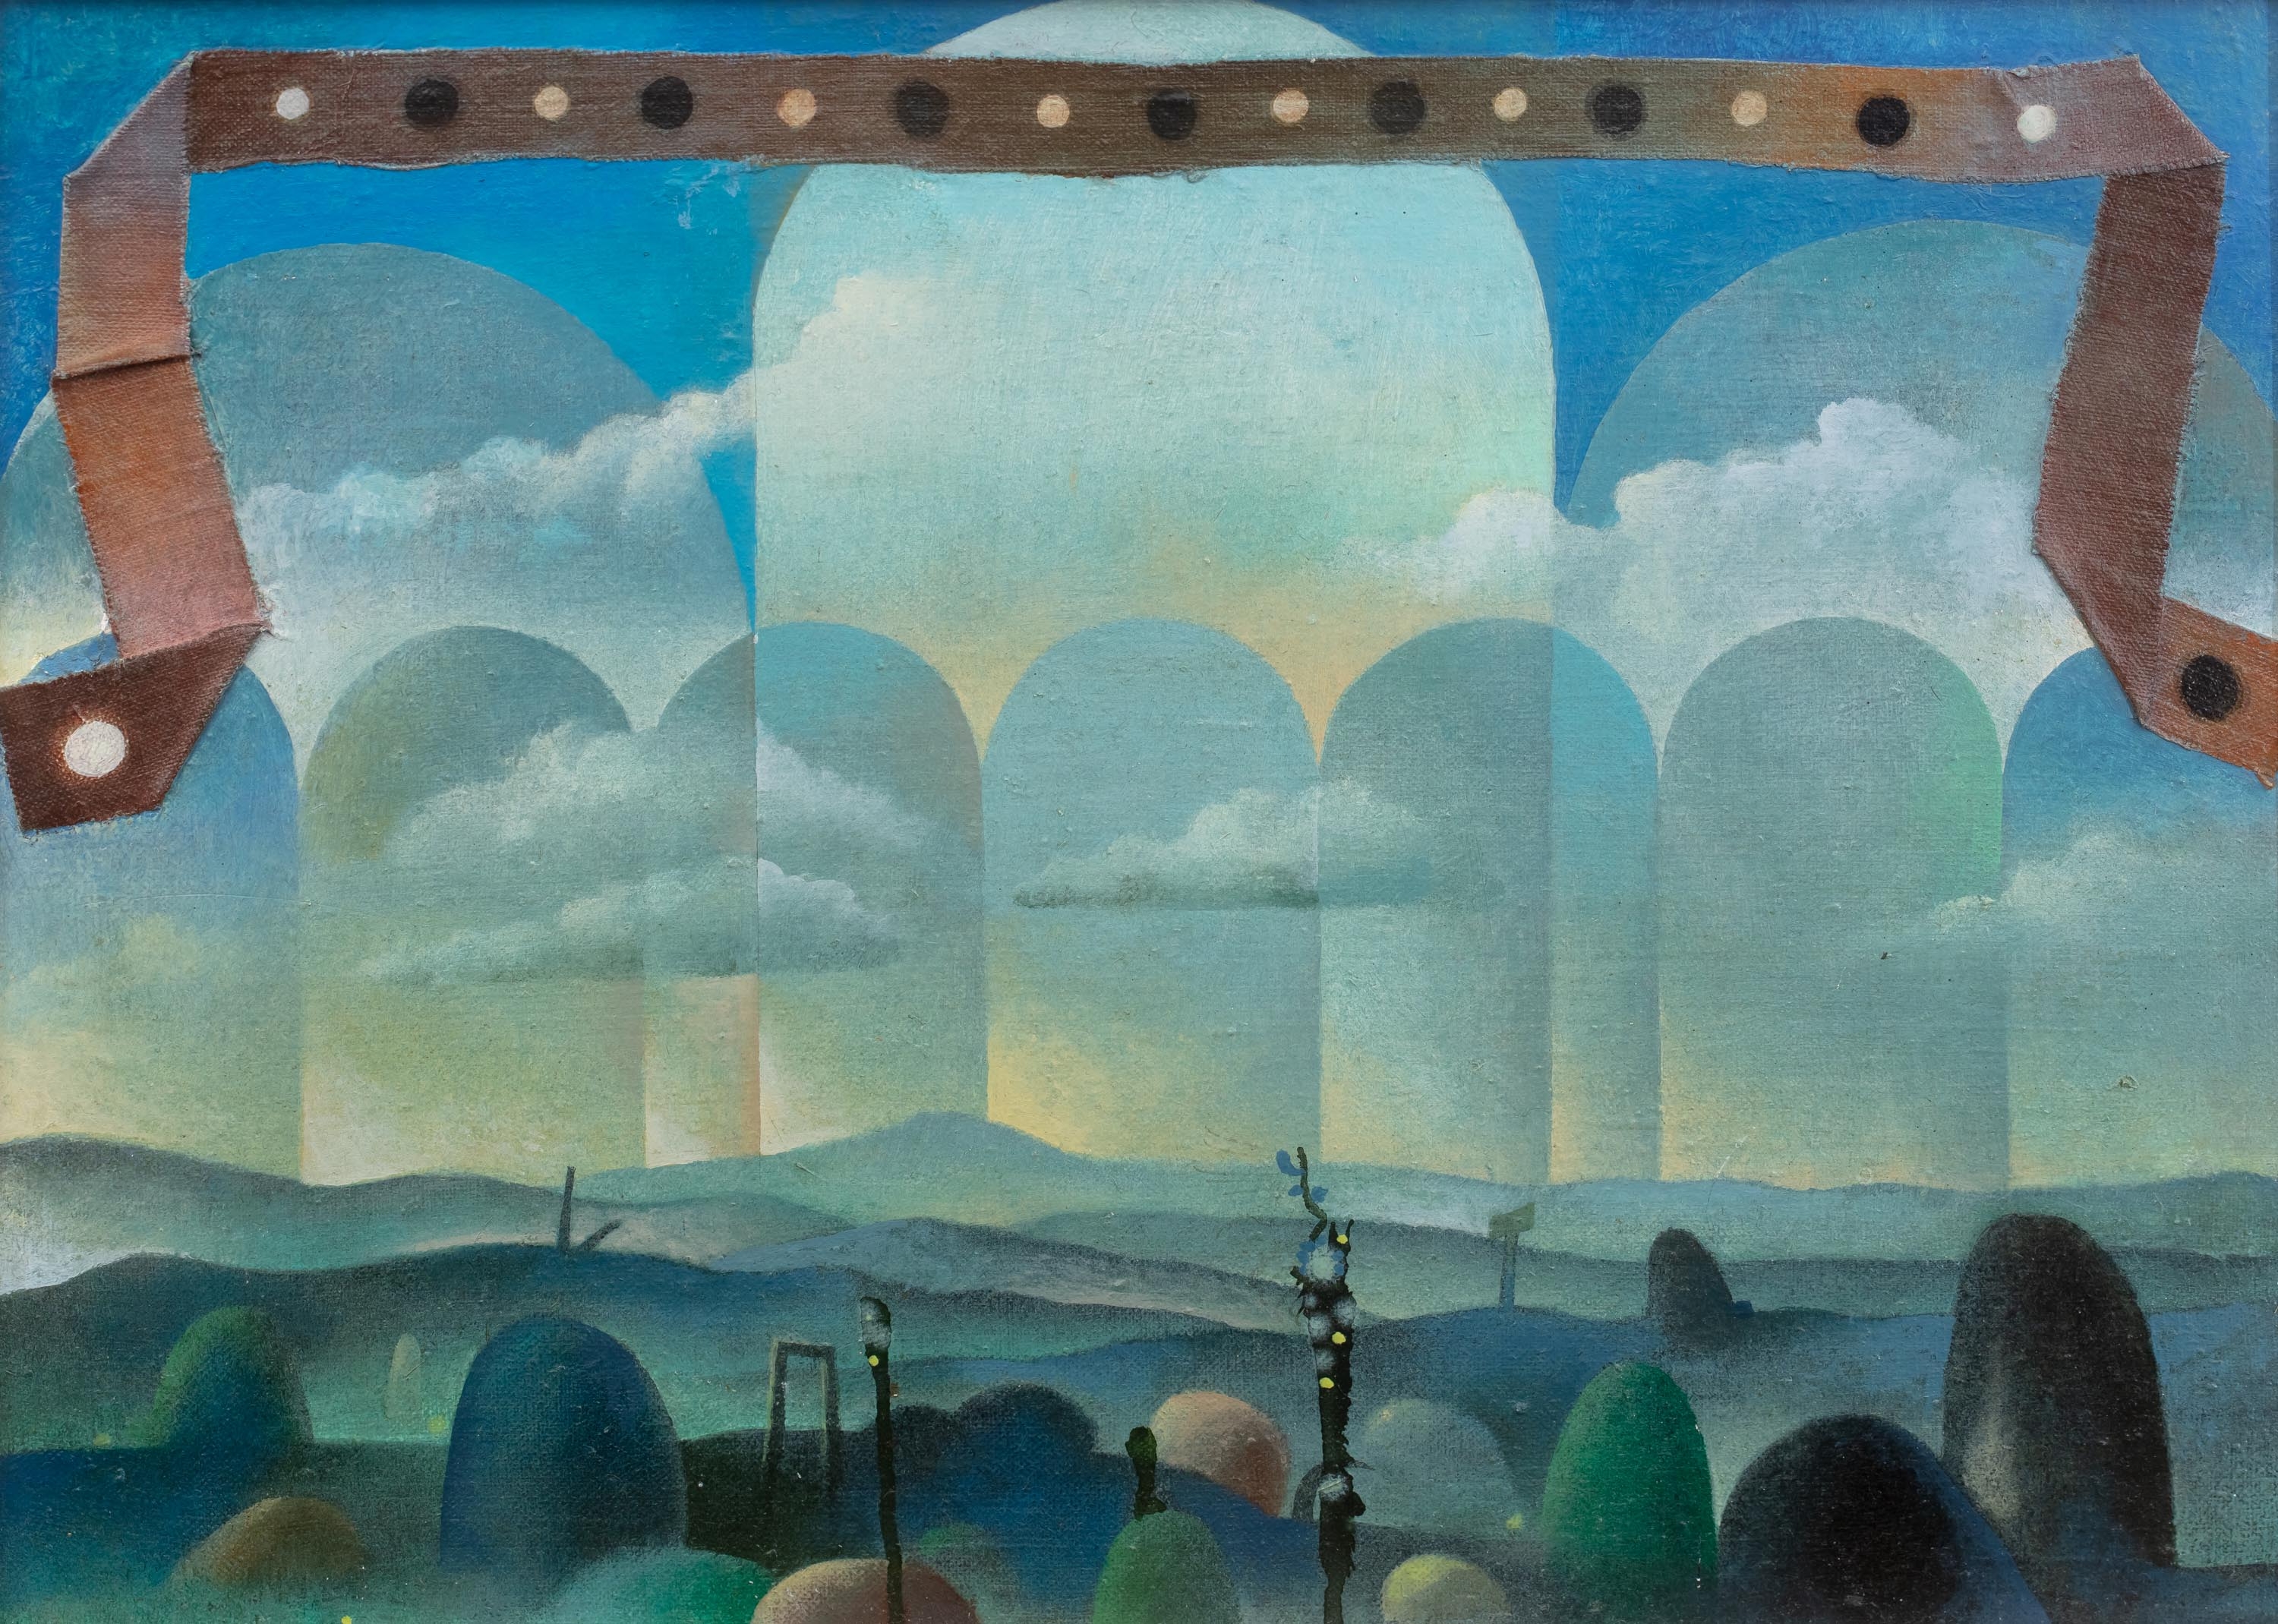 The Landscape to be sung by Henryk Waniek, 1997